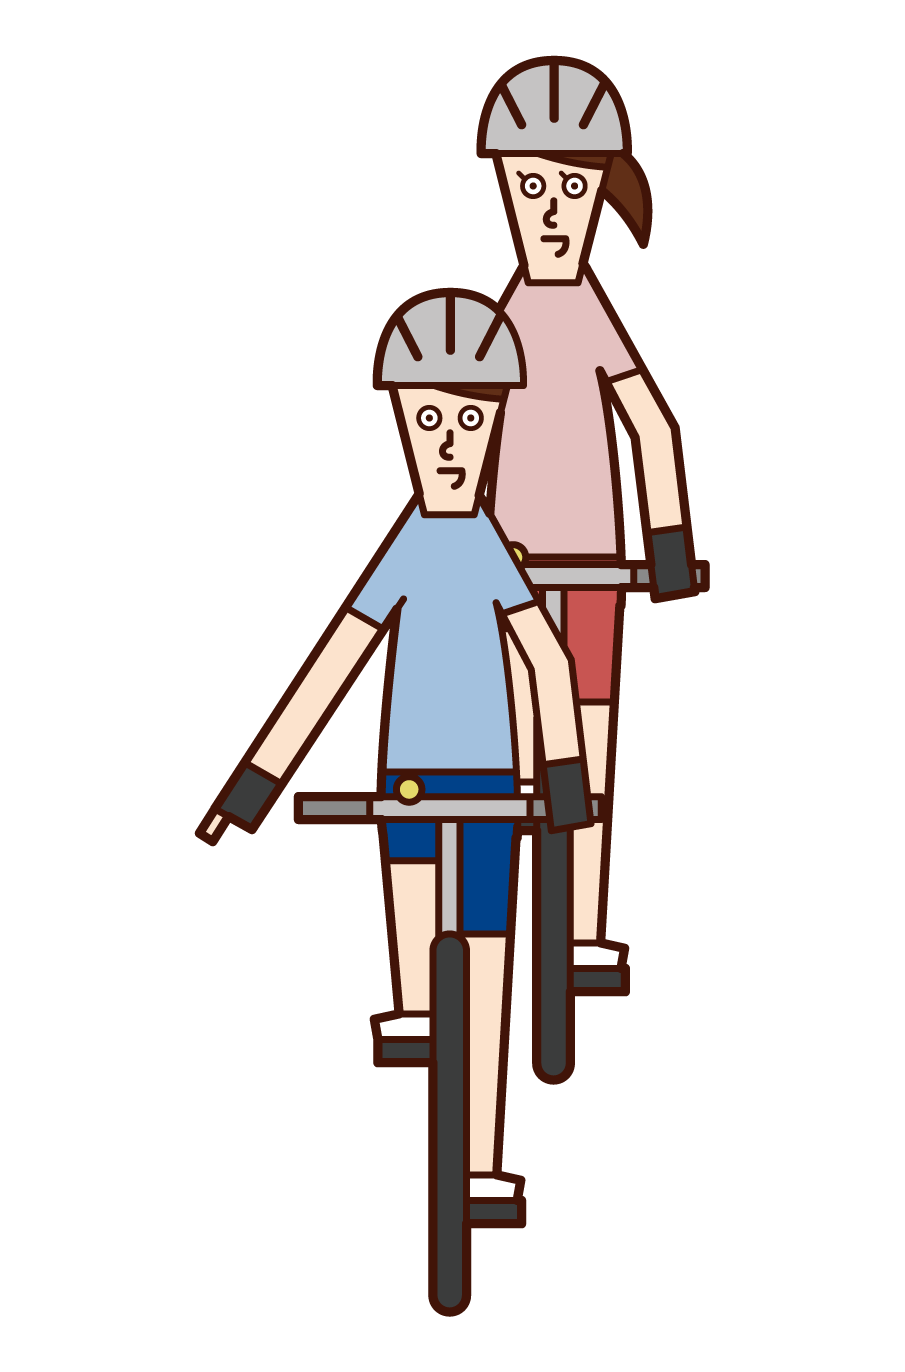 Illustration of attention (male) to the hand signal and road surface of the bicycle